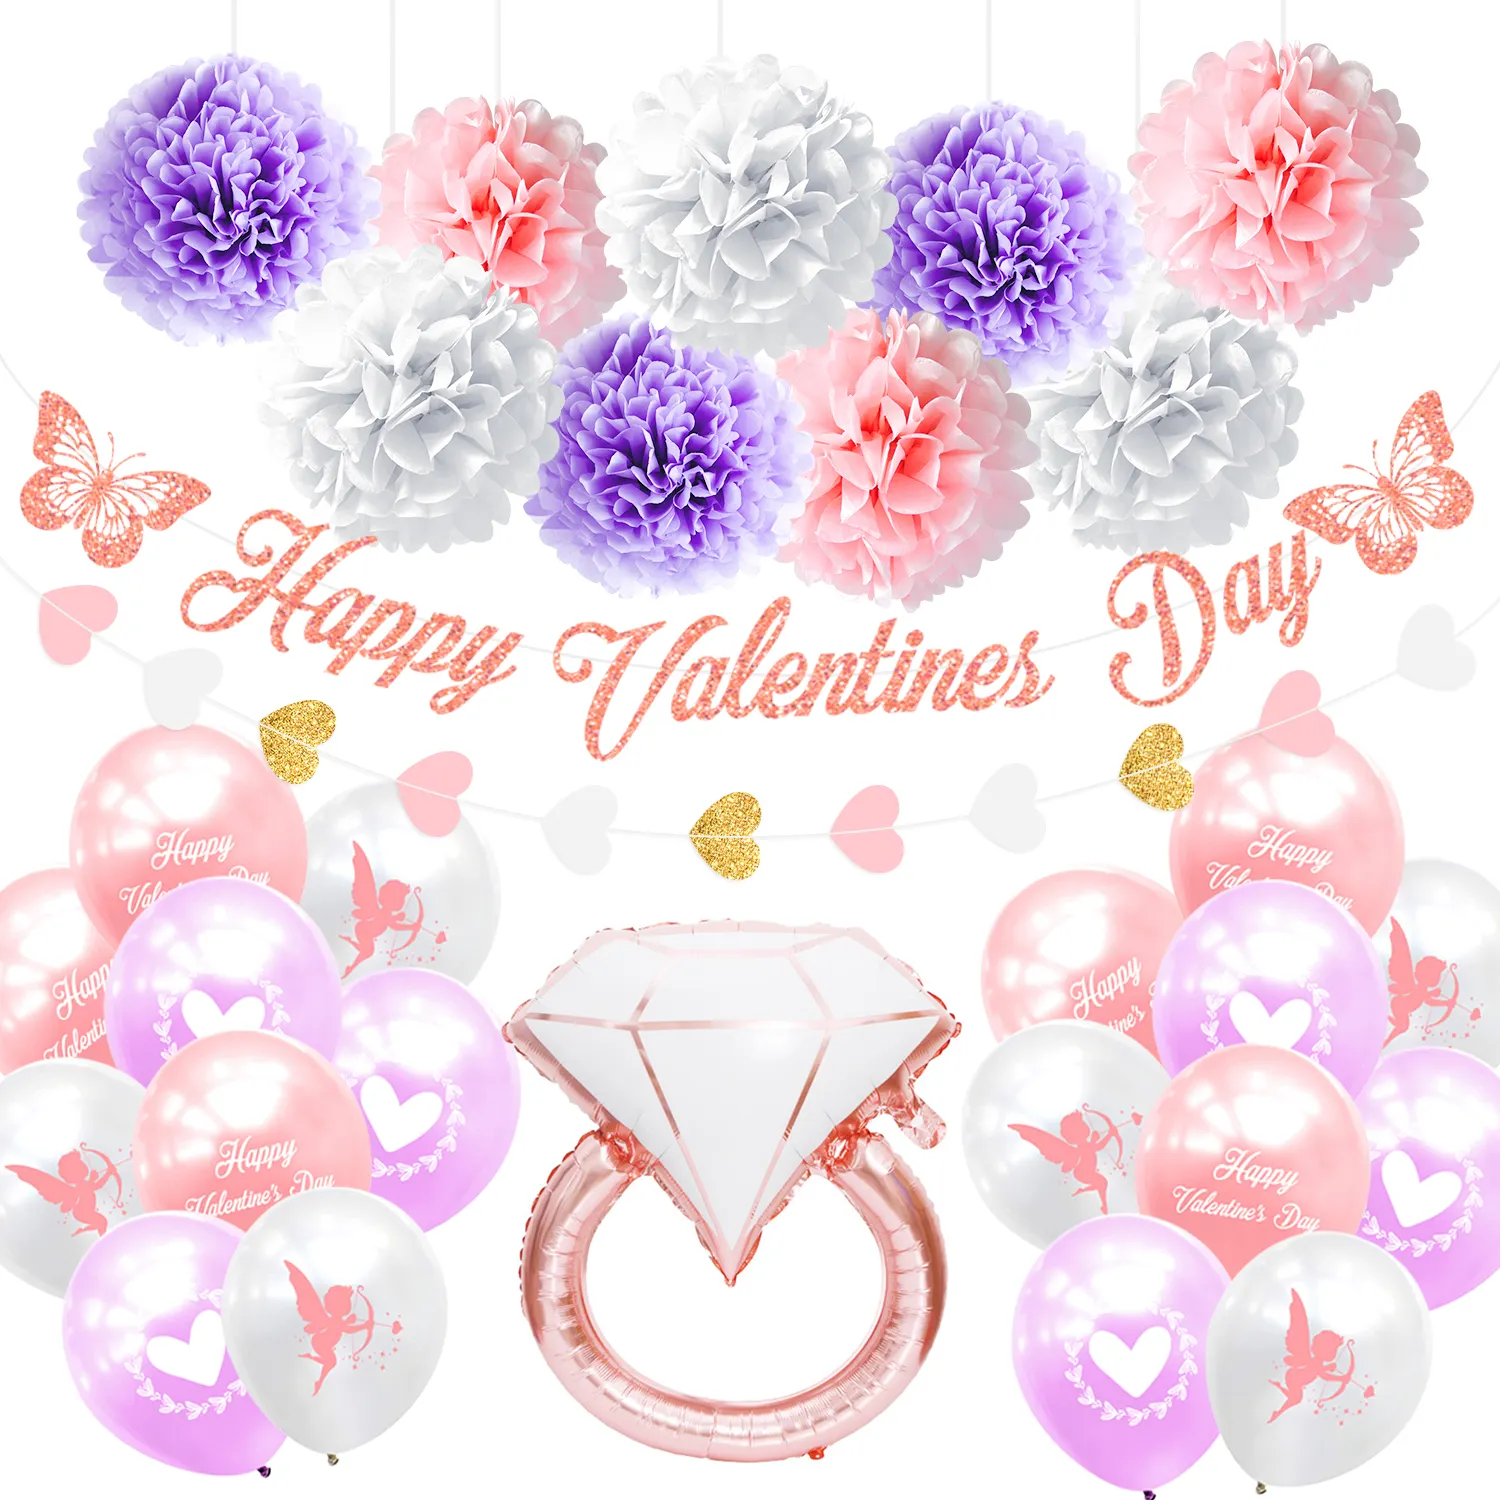 Nicro Sain Valentine Diamond Ring Latex Balloons Gifts Wedding Paper Happy Valentines Day Party Wall Background Decorations Kit